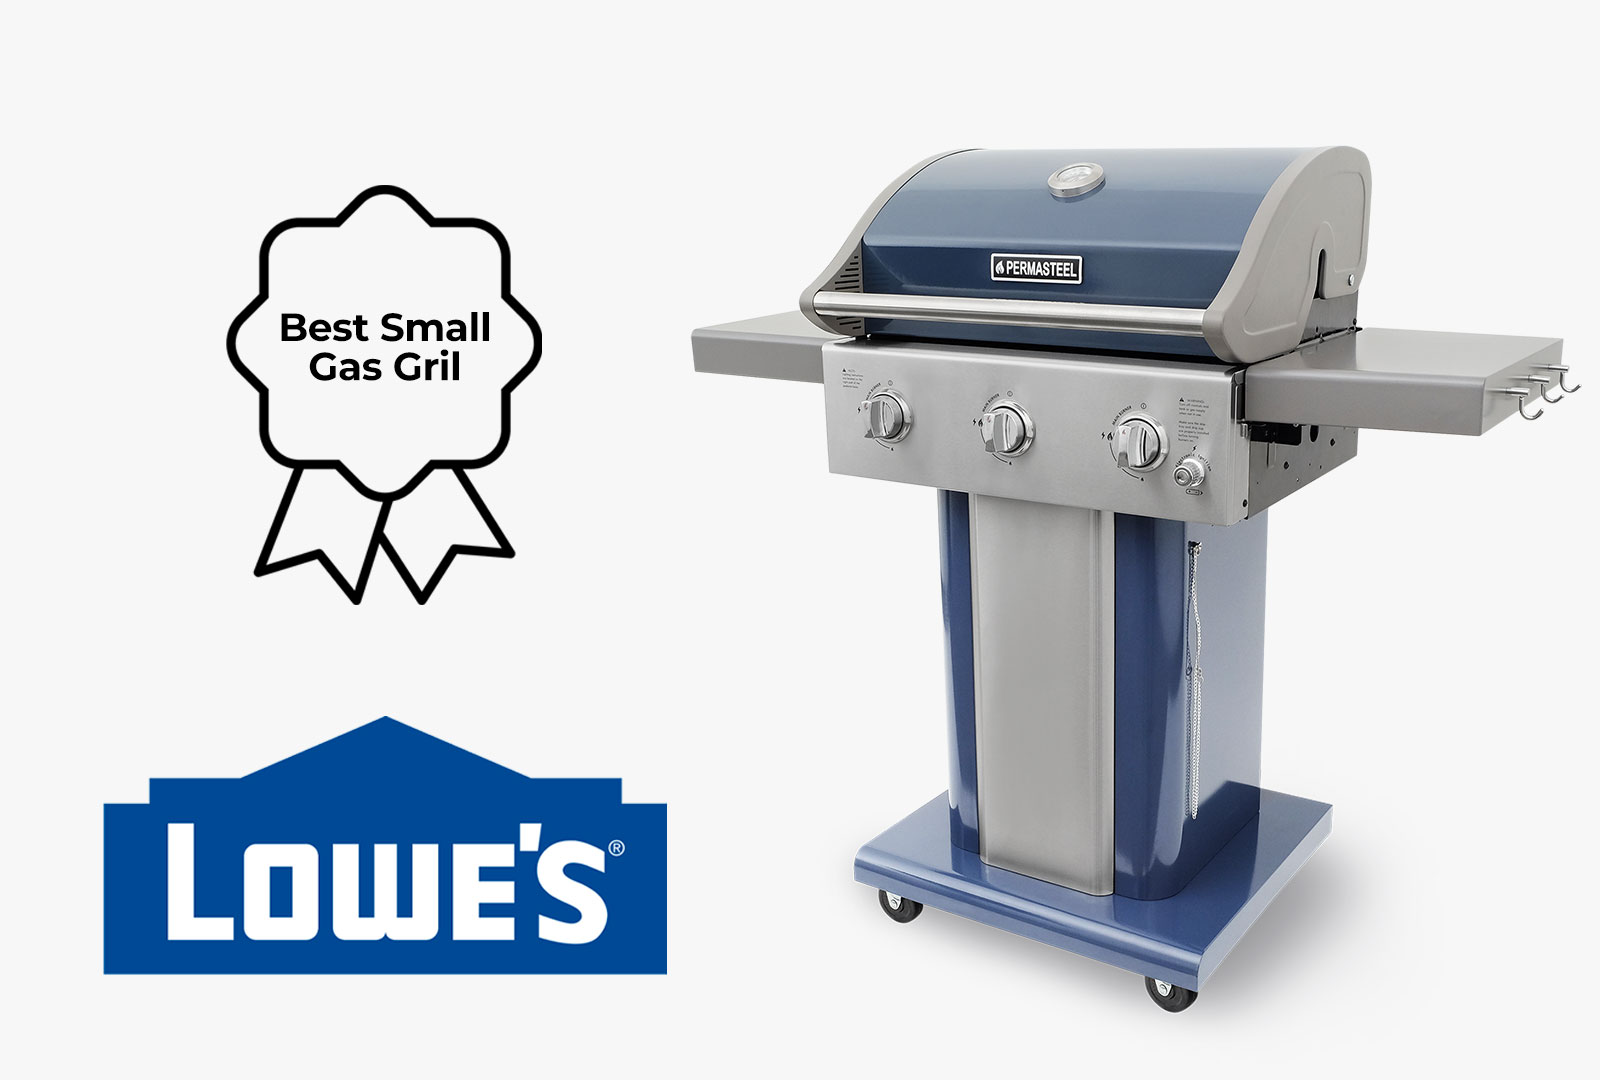 2022 - Permasteel 3-Burner Gas Grill in Azure Named "Best Small Gas Grill" at Lowe's